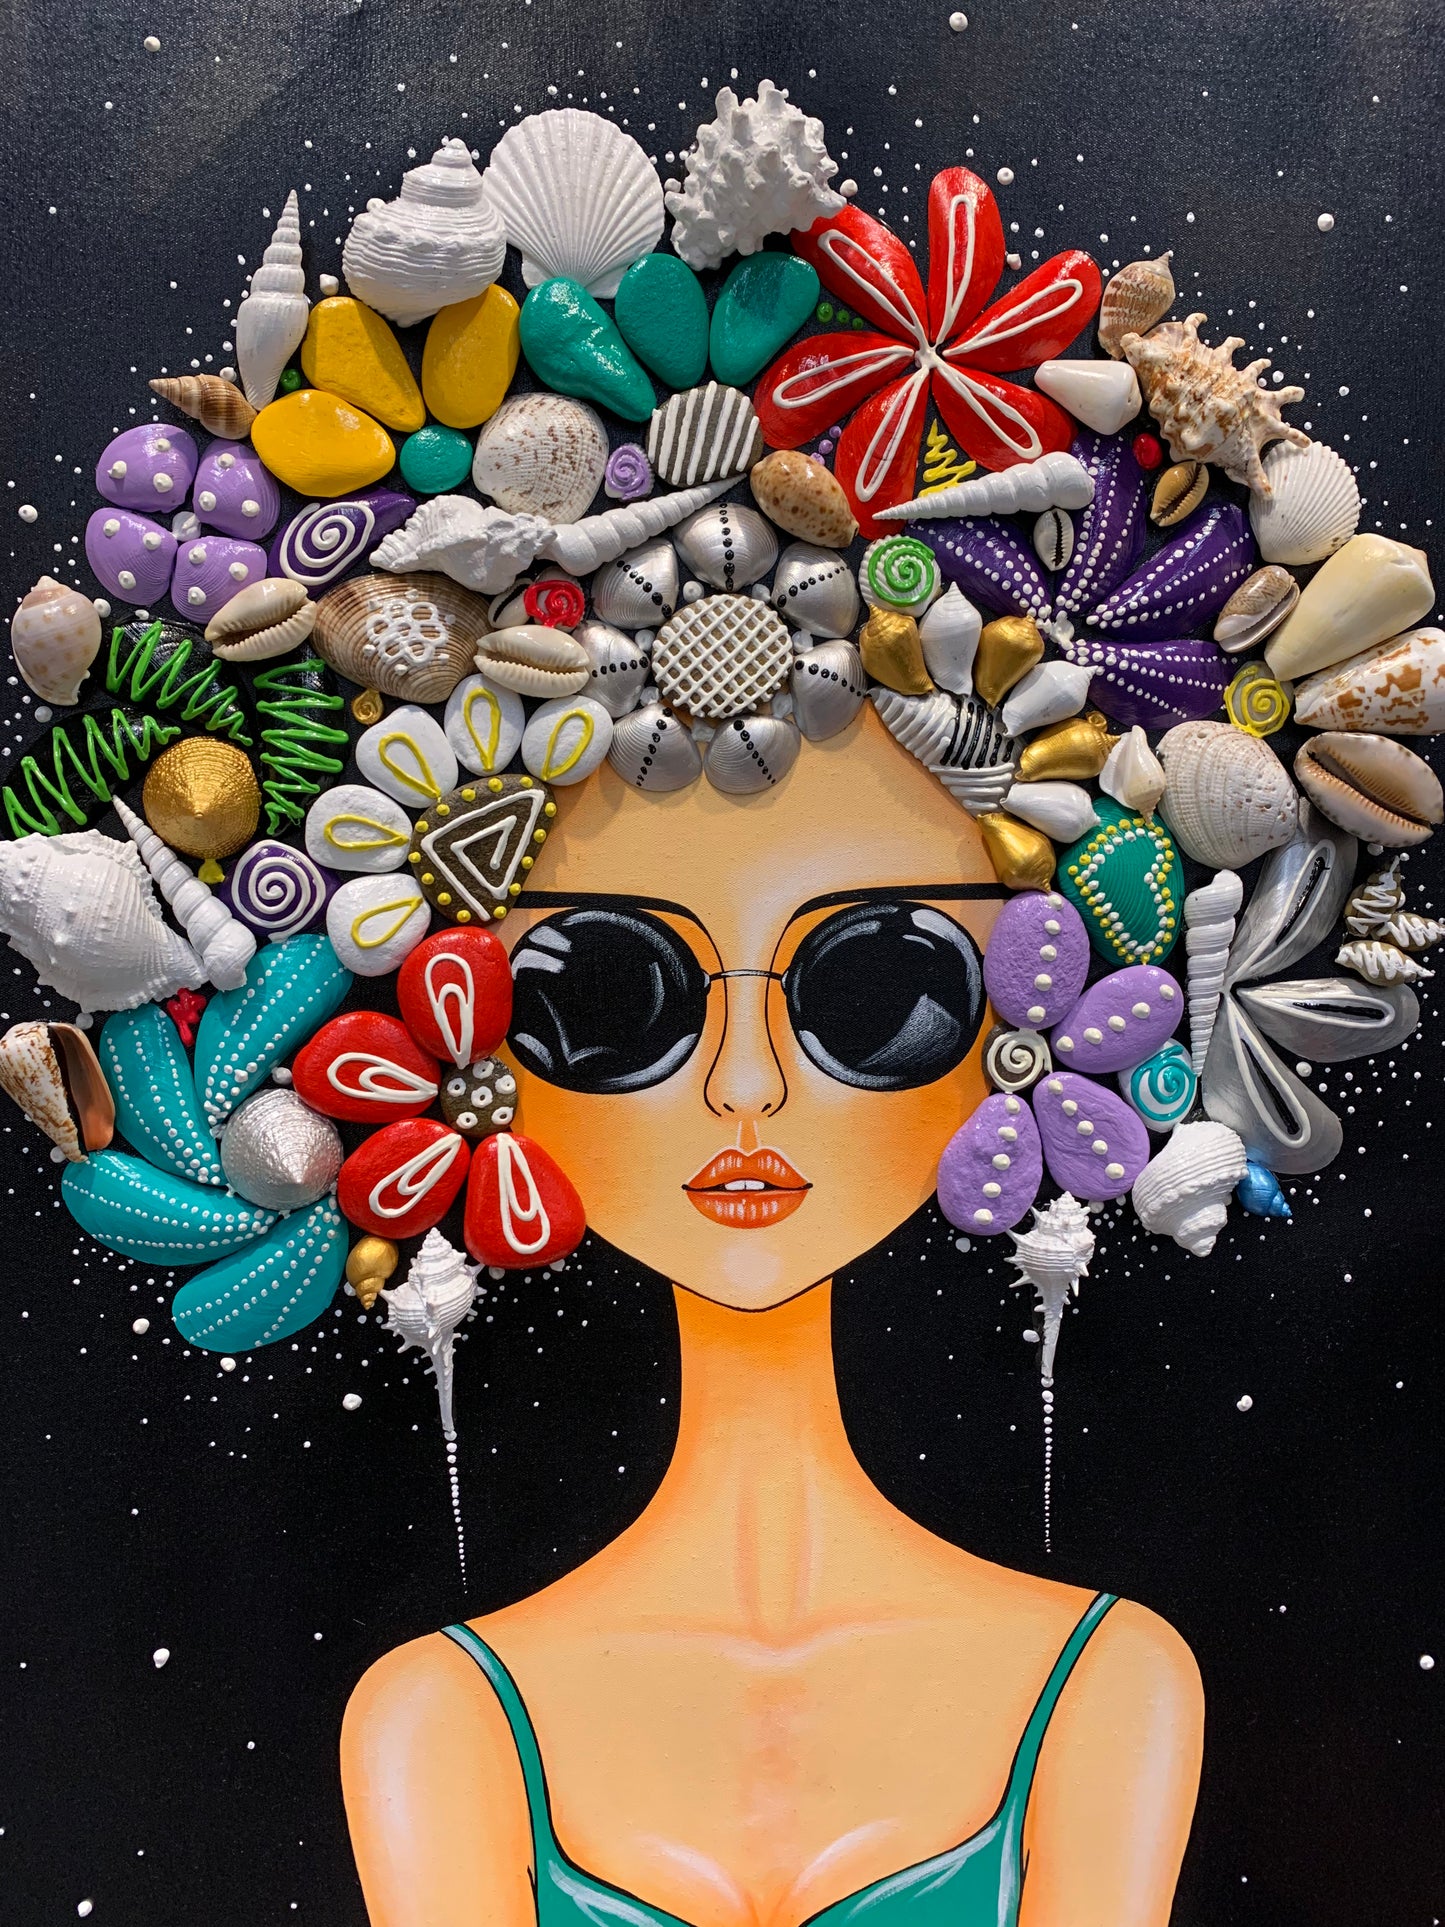 'Cool girl in green', canvas with crafted pebbles and seashells